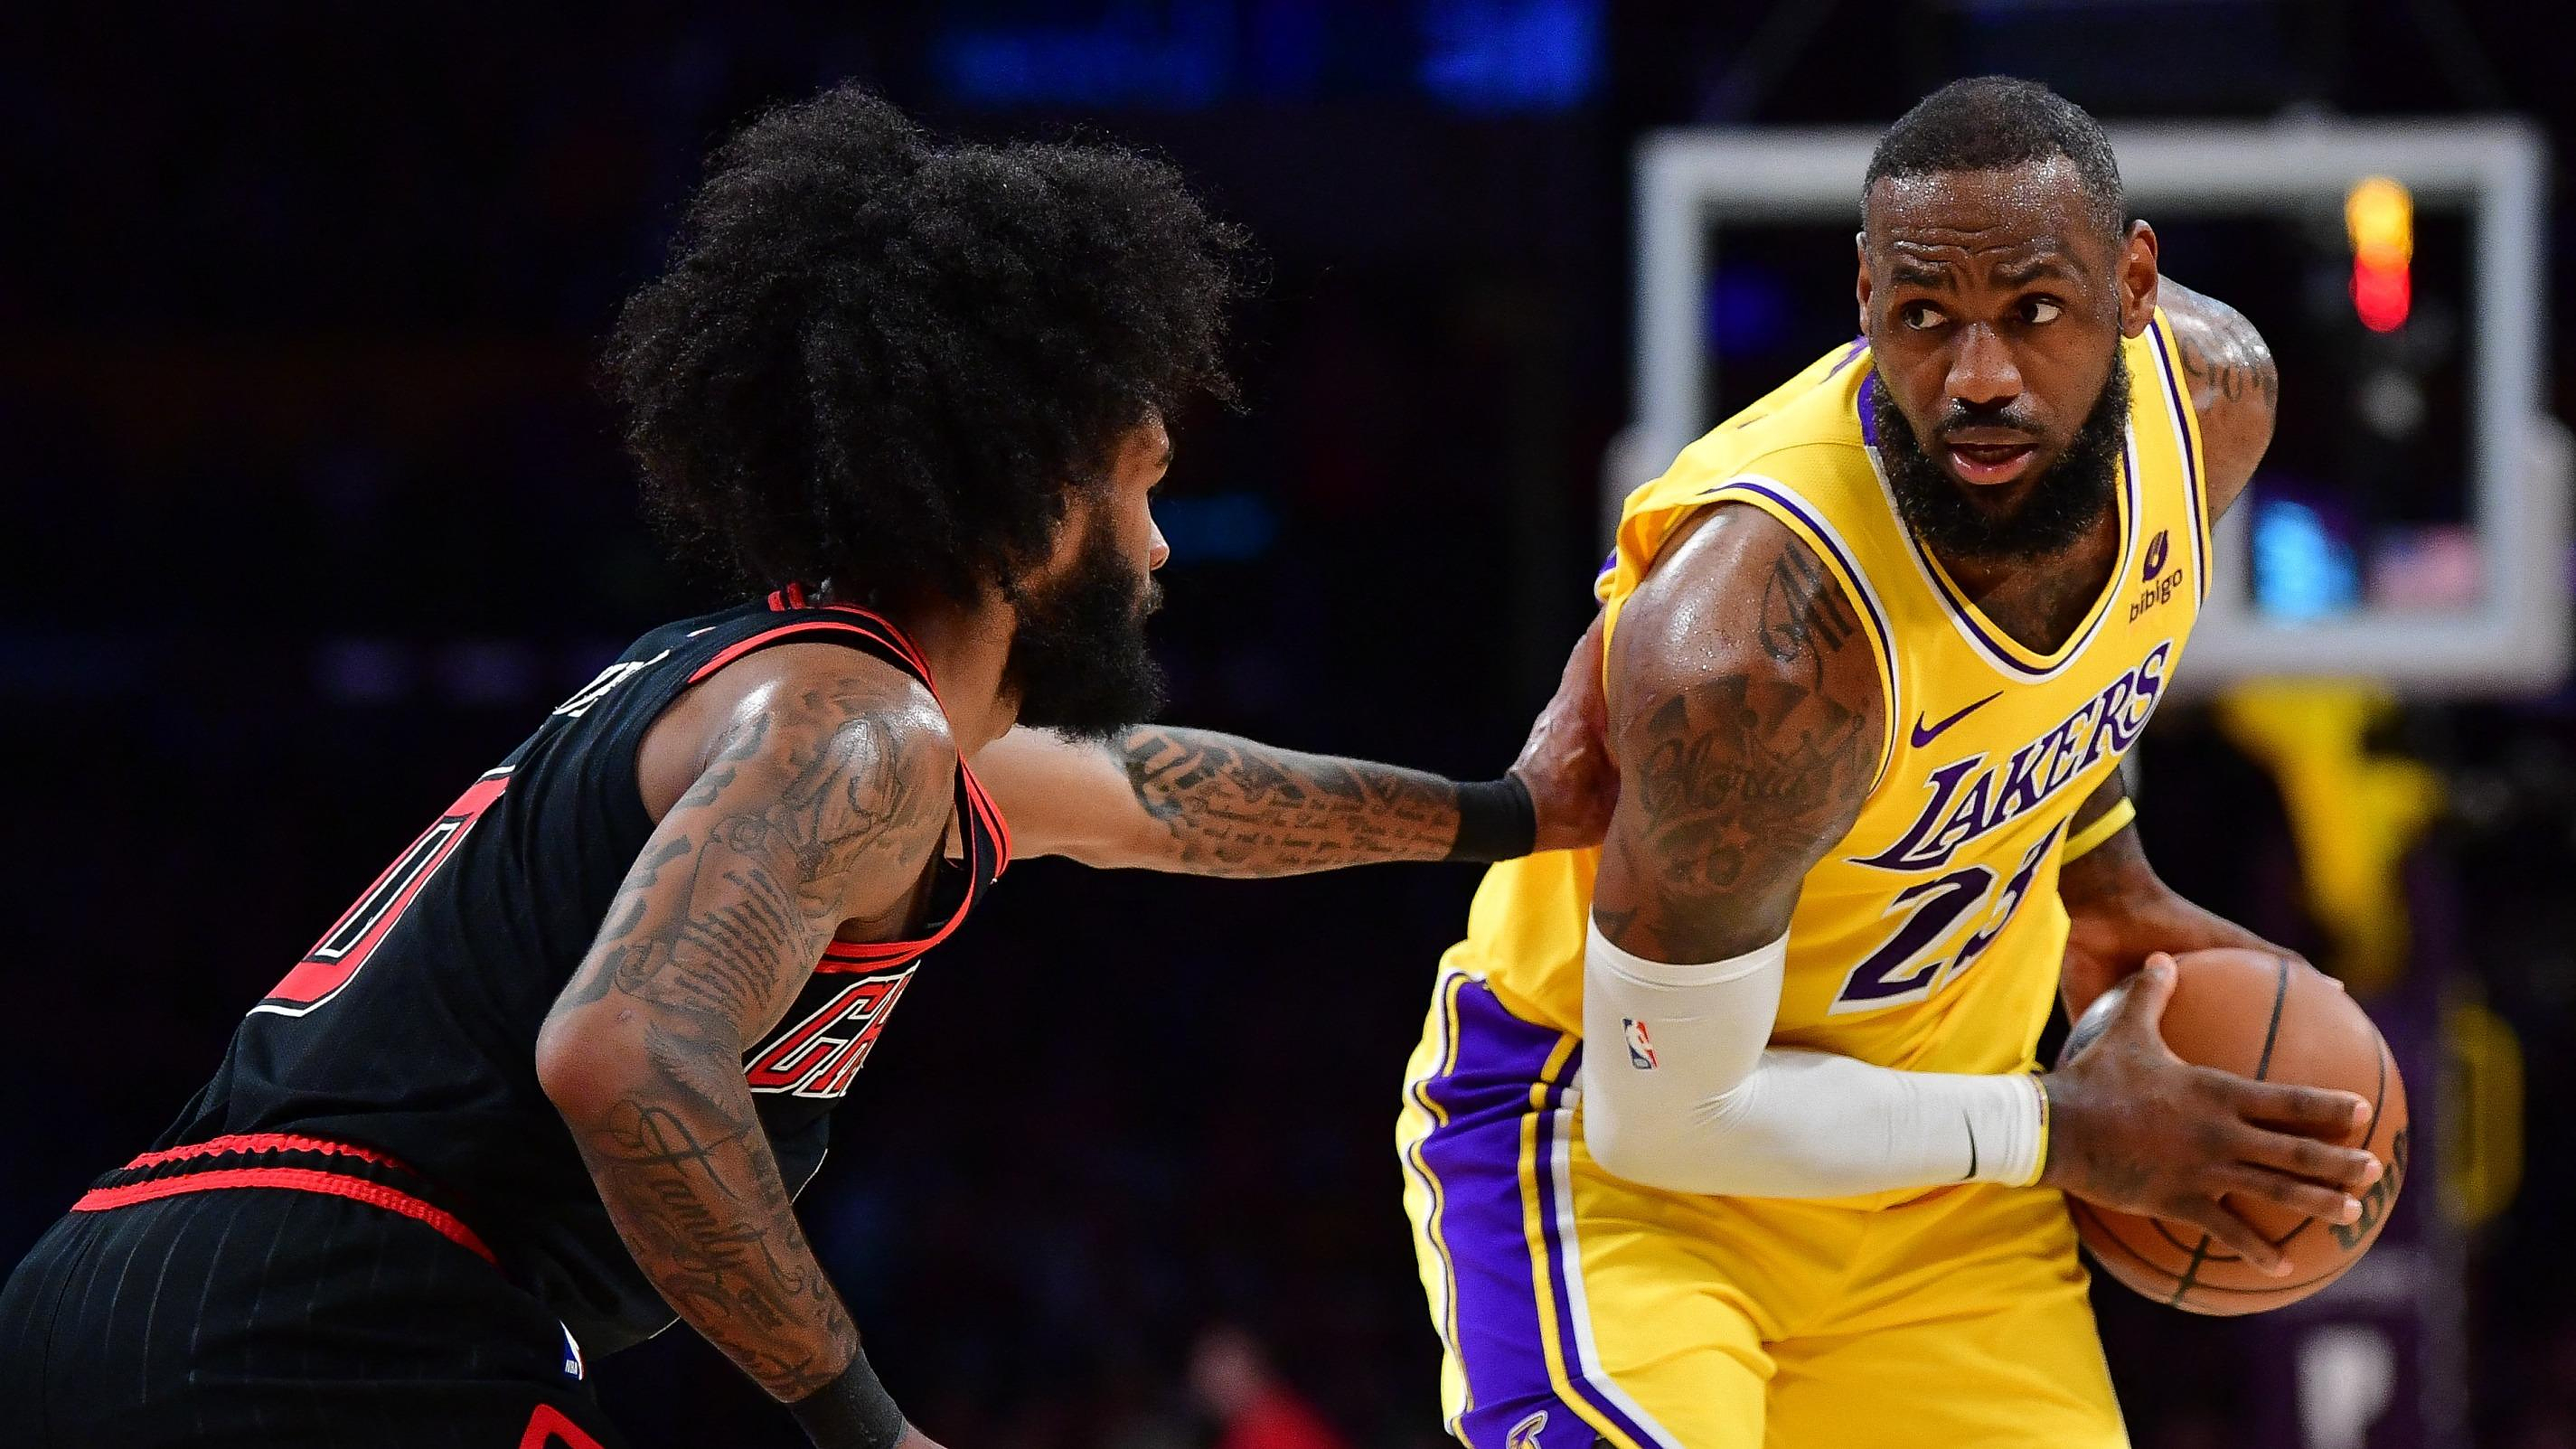 NBA: LeBron and the Lakers at the party, grimace soup for Curry and the Warriors